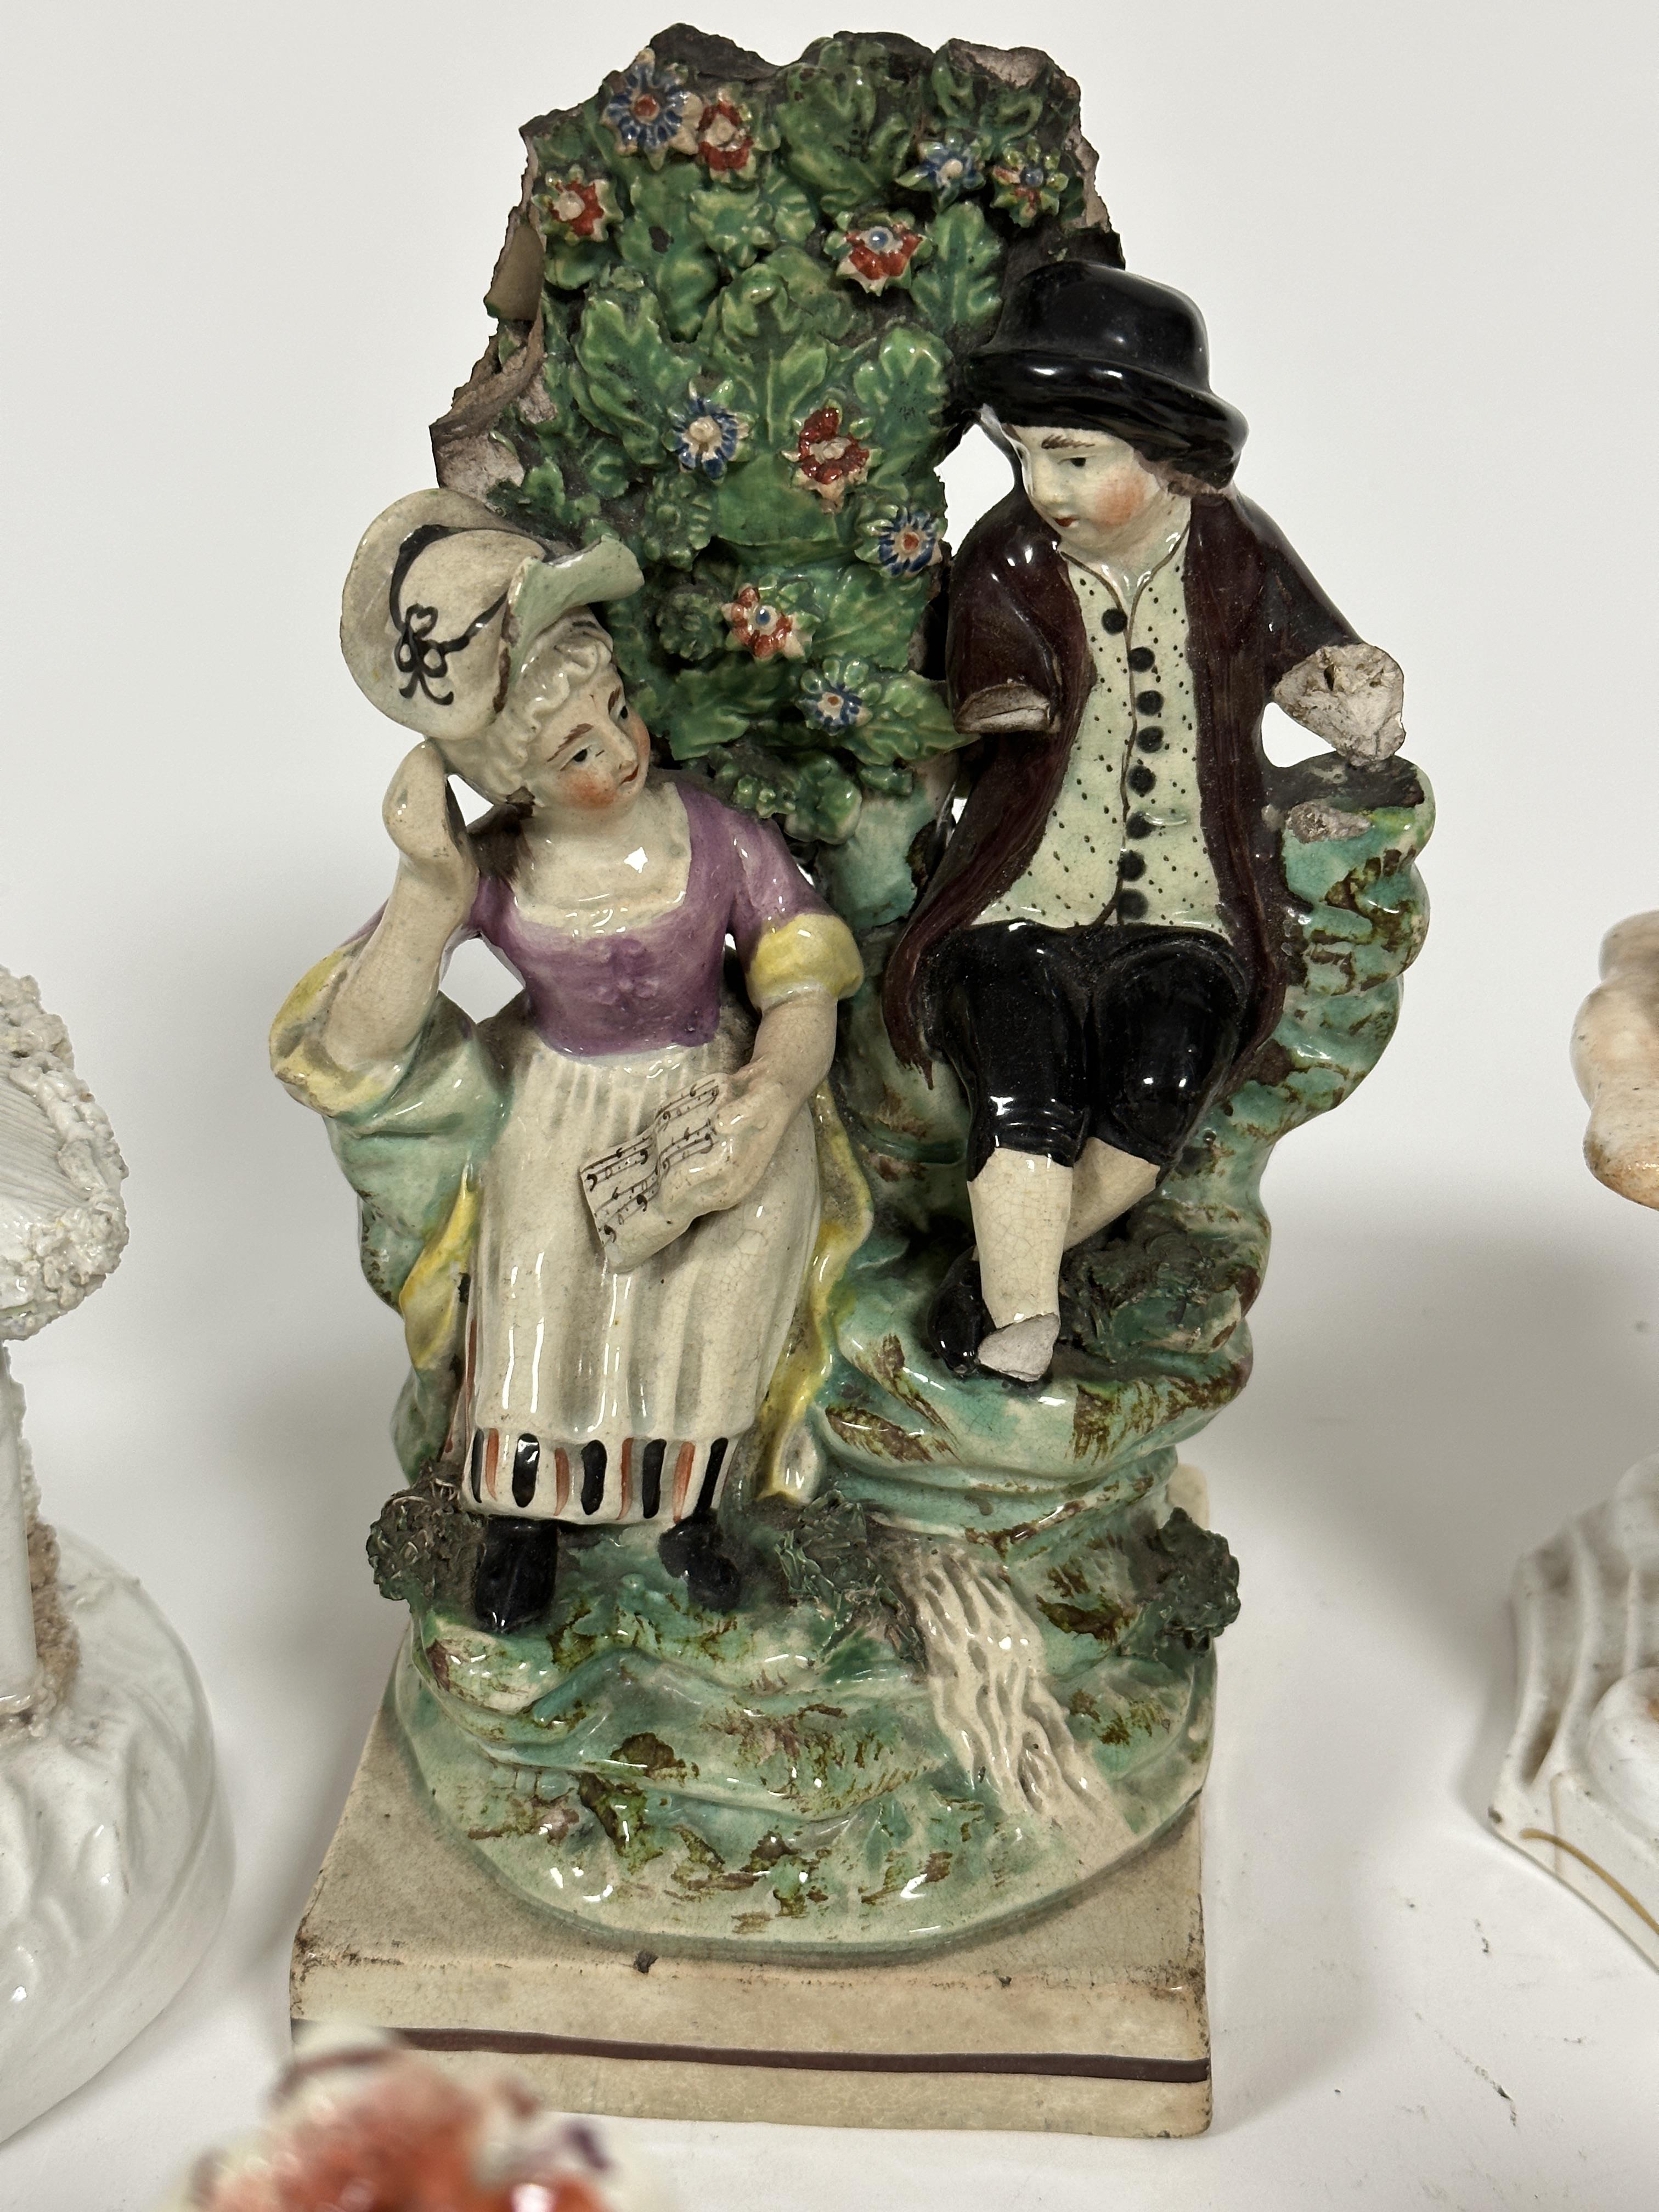 An early 19thc Pratt ware figure group of a courting couple, back a/f, lady holding a sheet of - Image 2 of 7